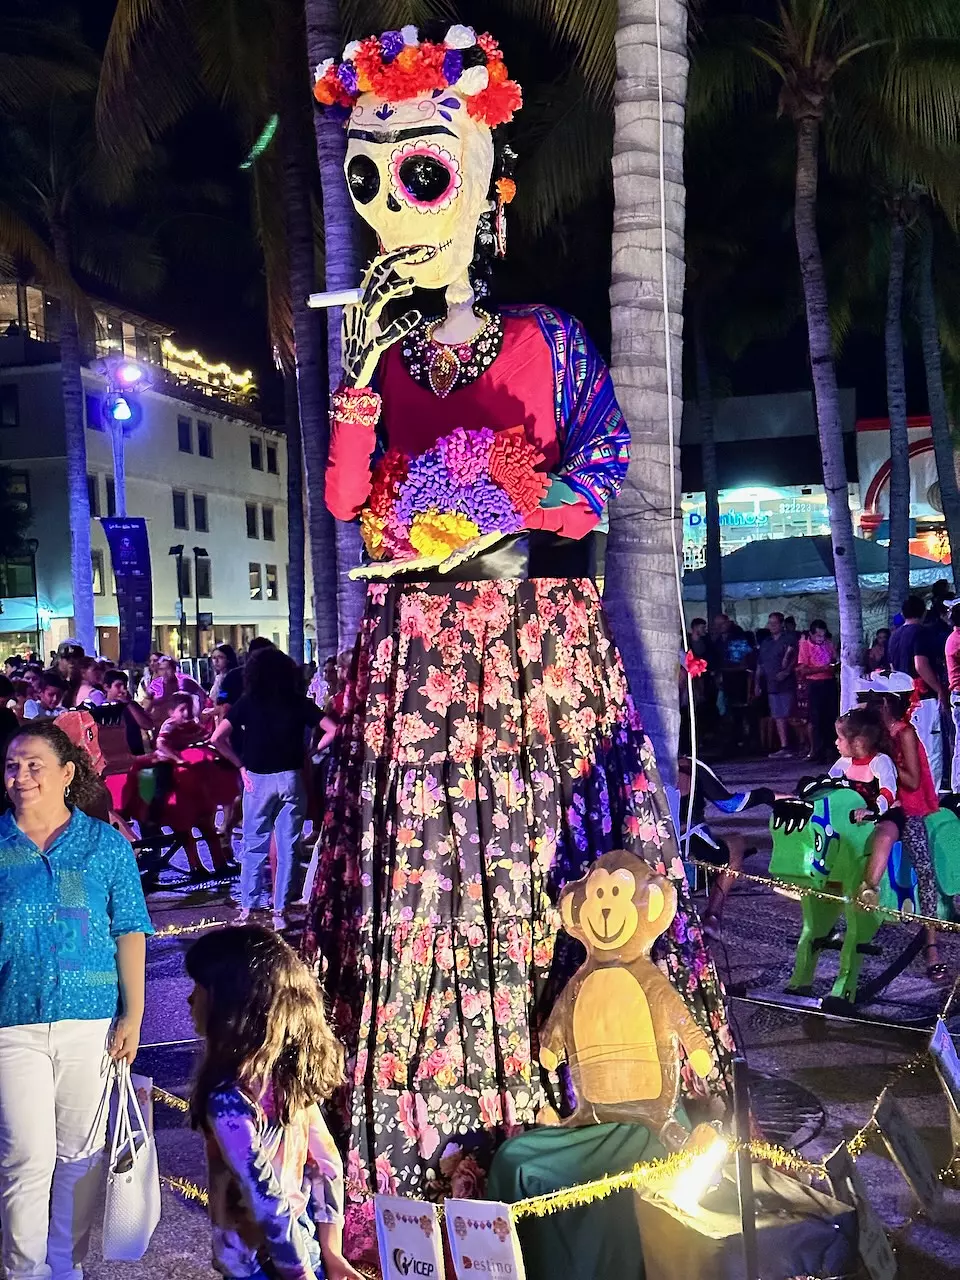 A purple and pink Catrina doll